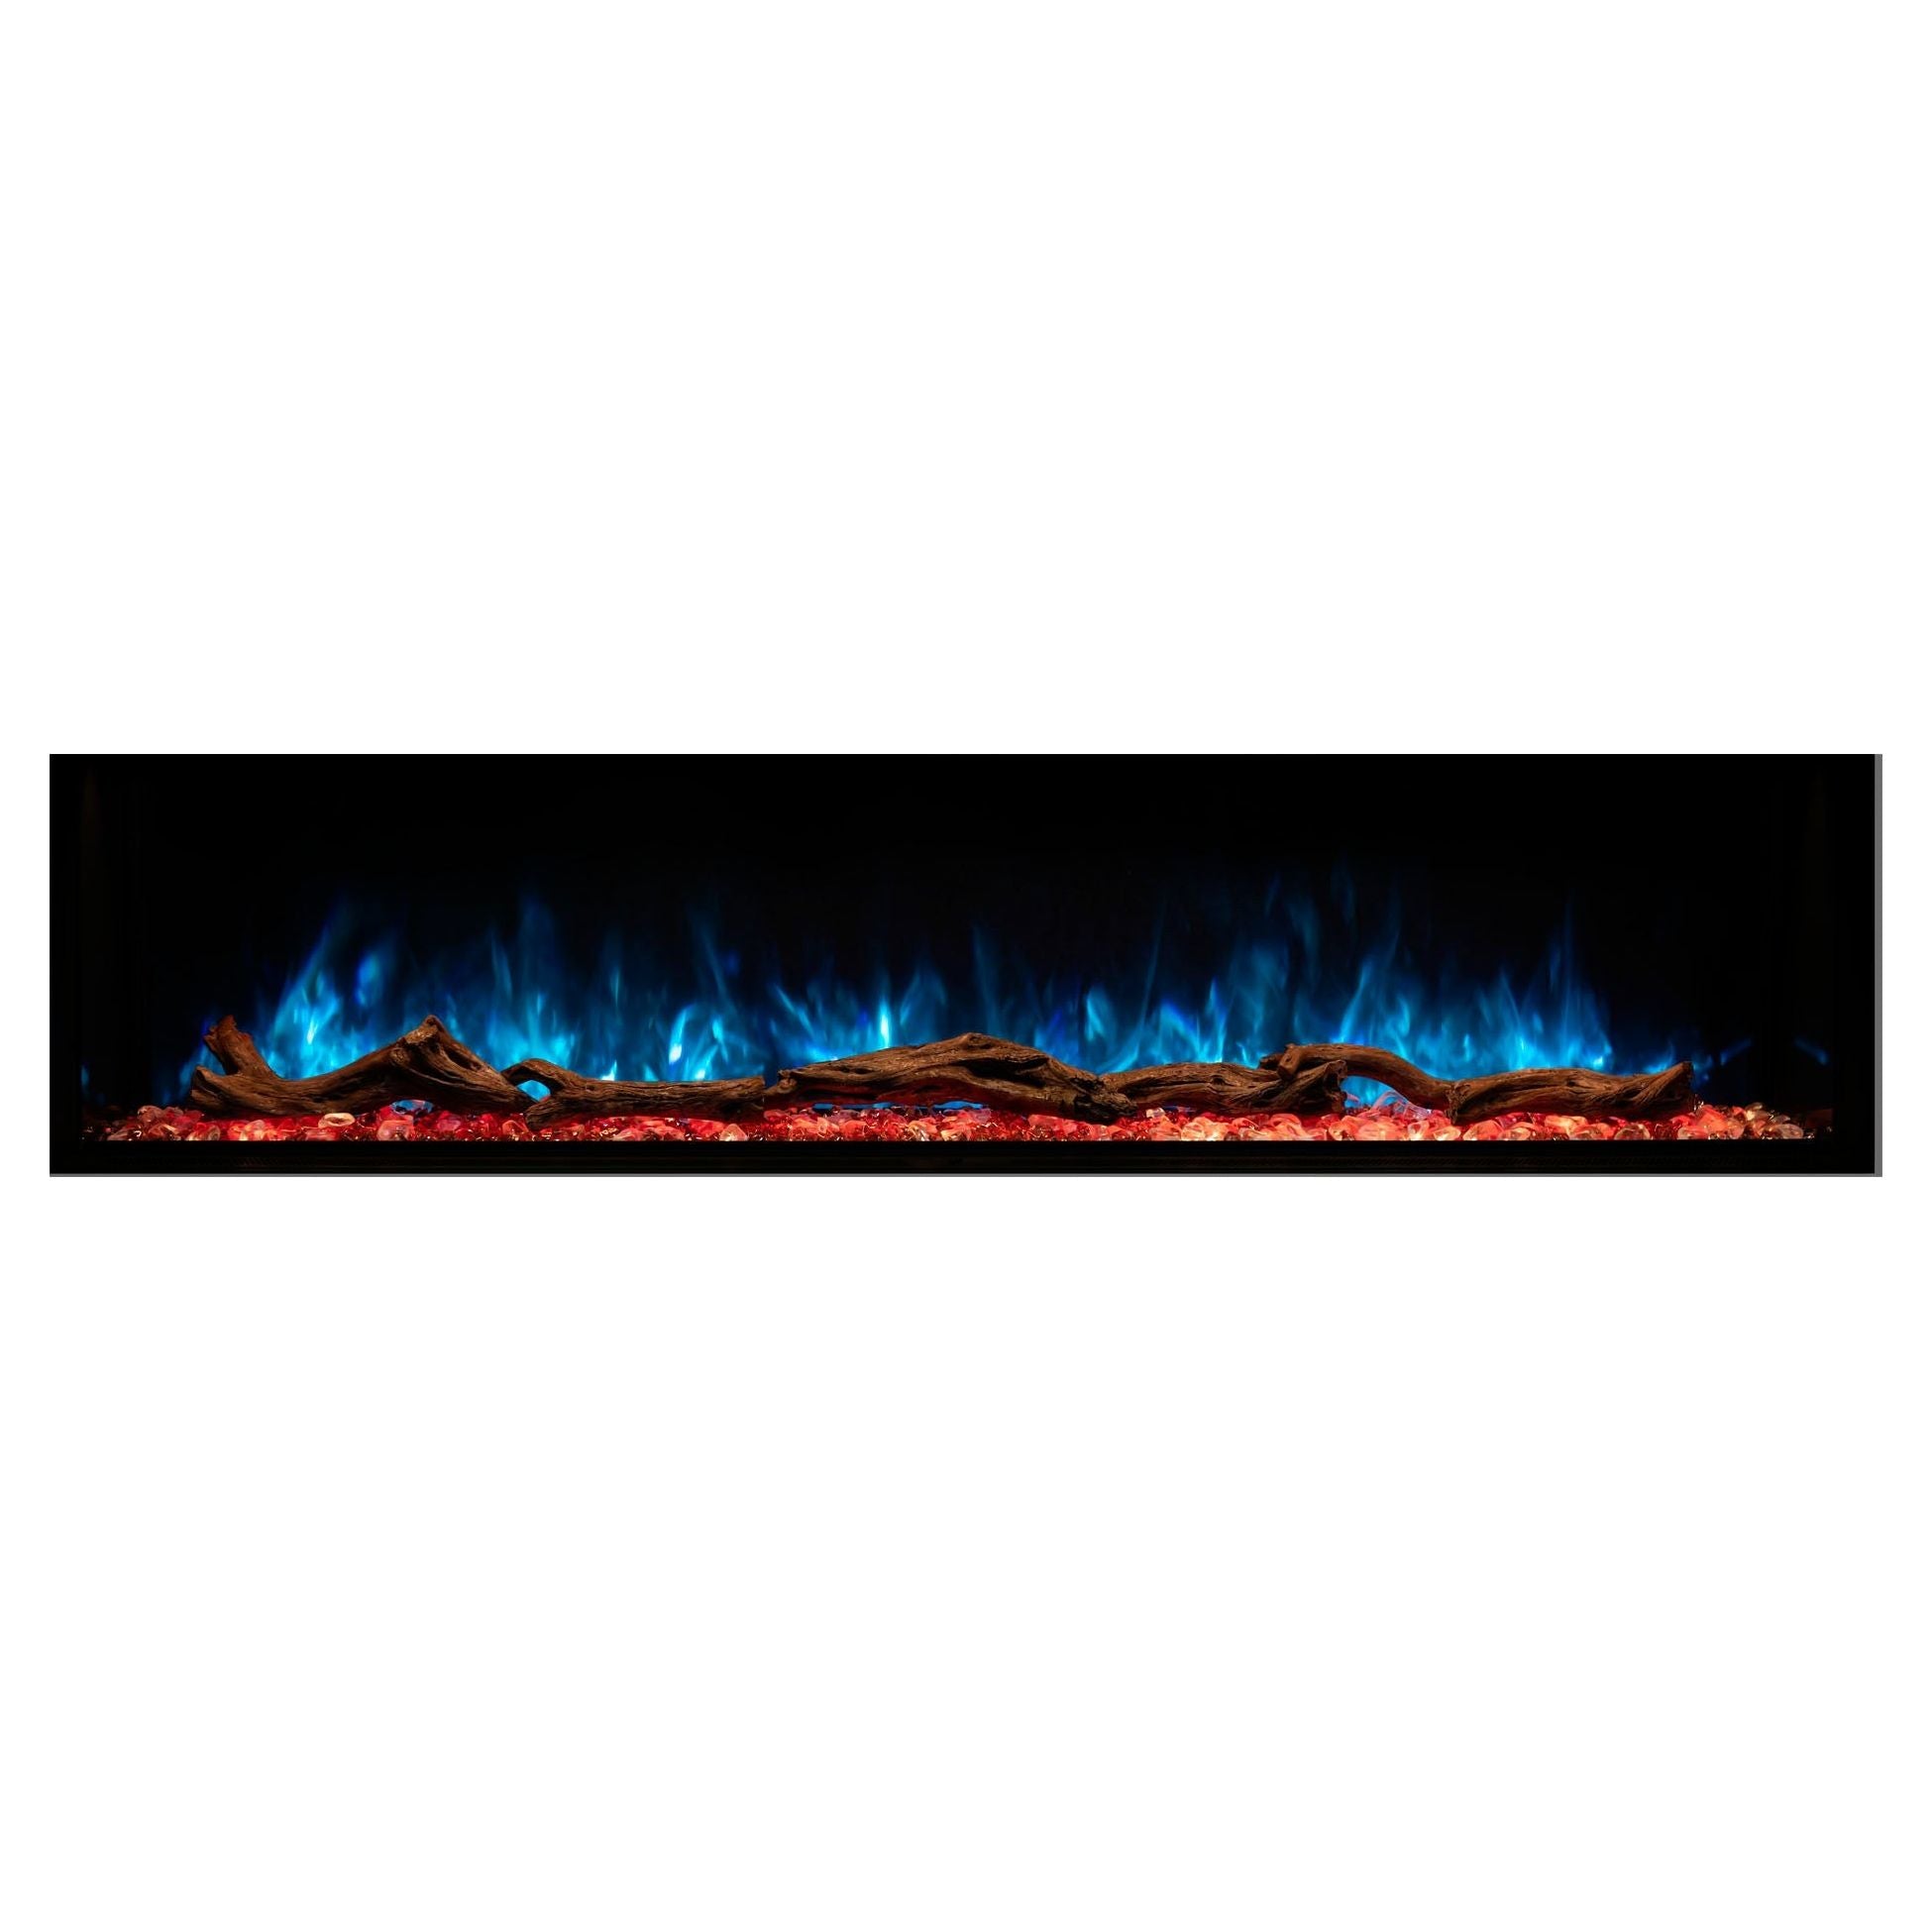 Modern Flames Modern Flames Landscape Pro Multi 68-inch 3-Sided / 2-Sided Built In Electric Fireplace Multi-Side View Electric Fireplace